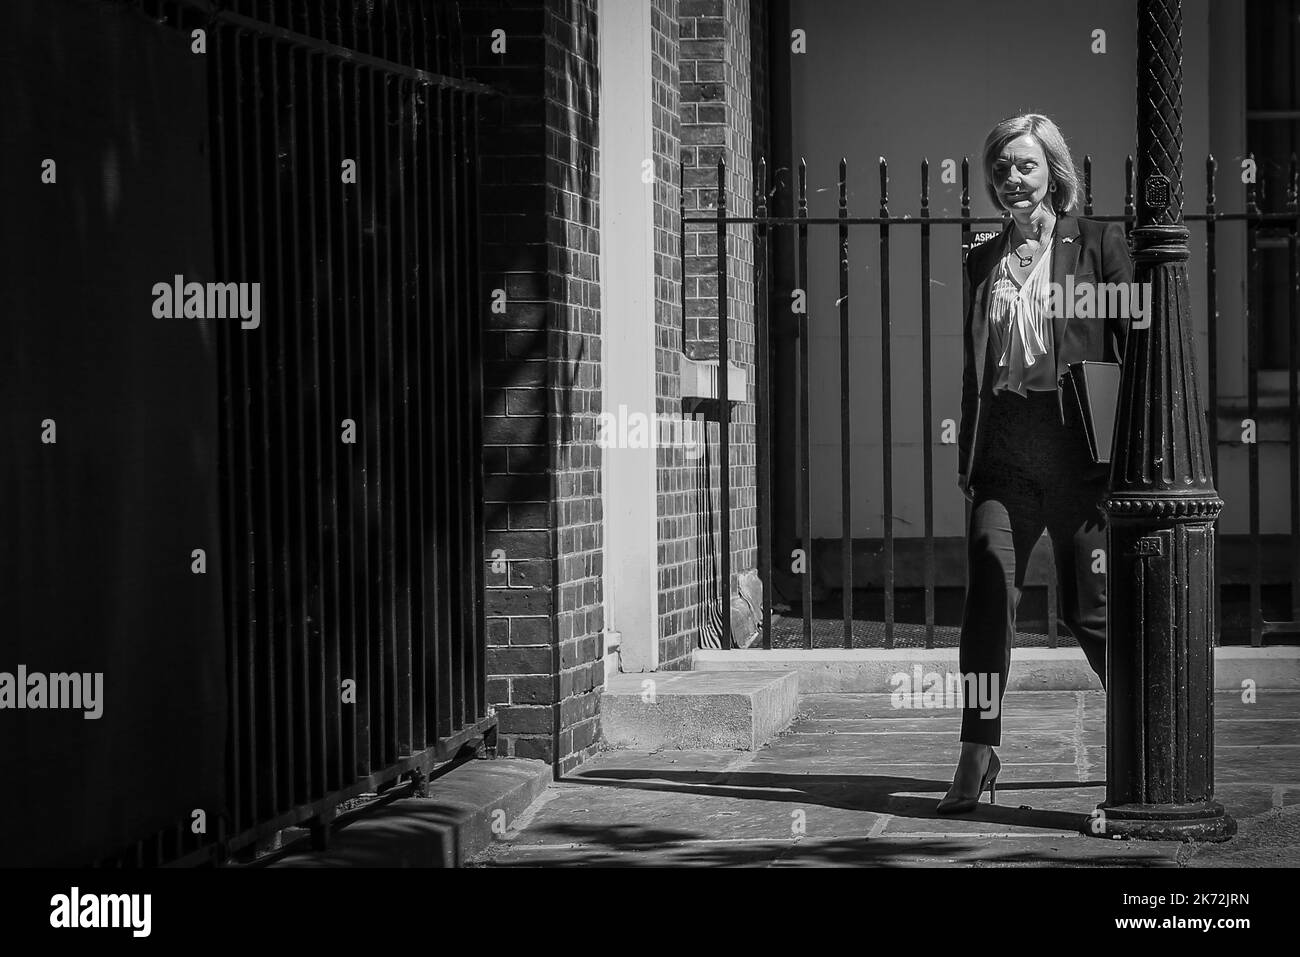 Liz Truss, MP, Conservative Party politician, now Prime Minister of the United Kingdom, then Foreign Secretary, walking alone in Downing Street Stock Photo